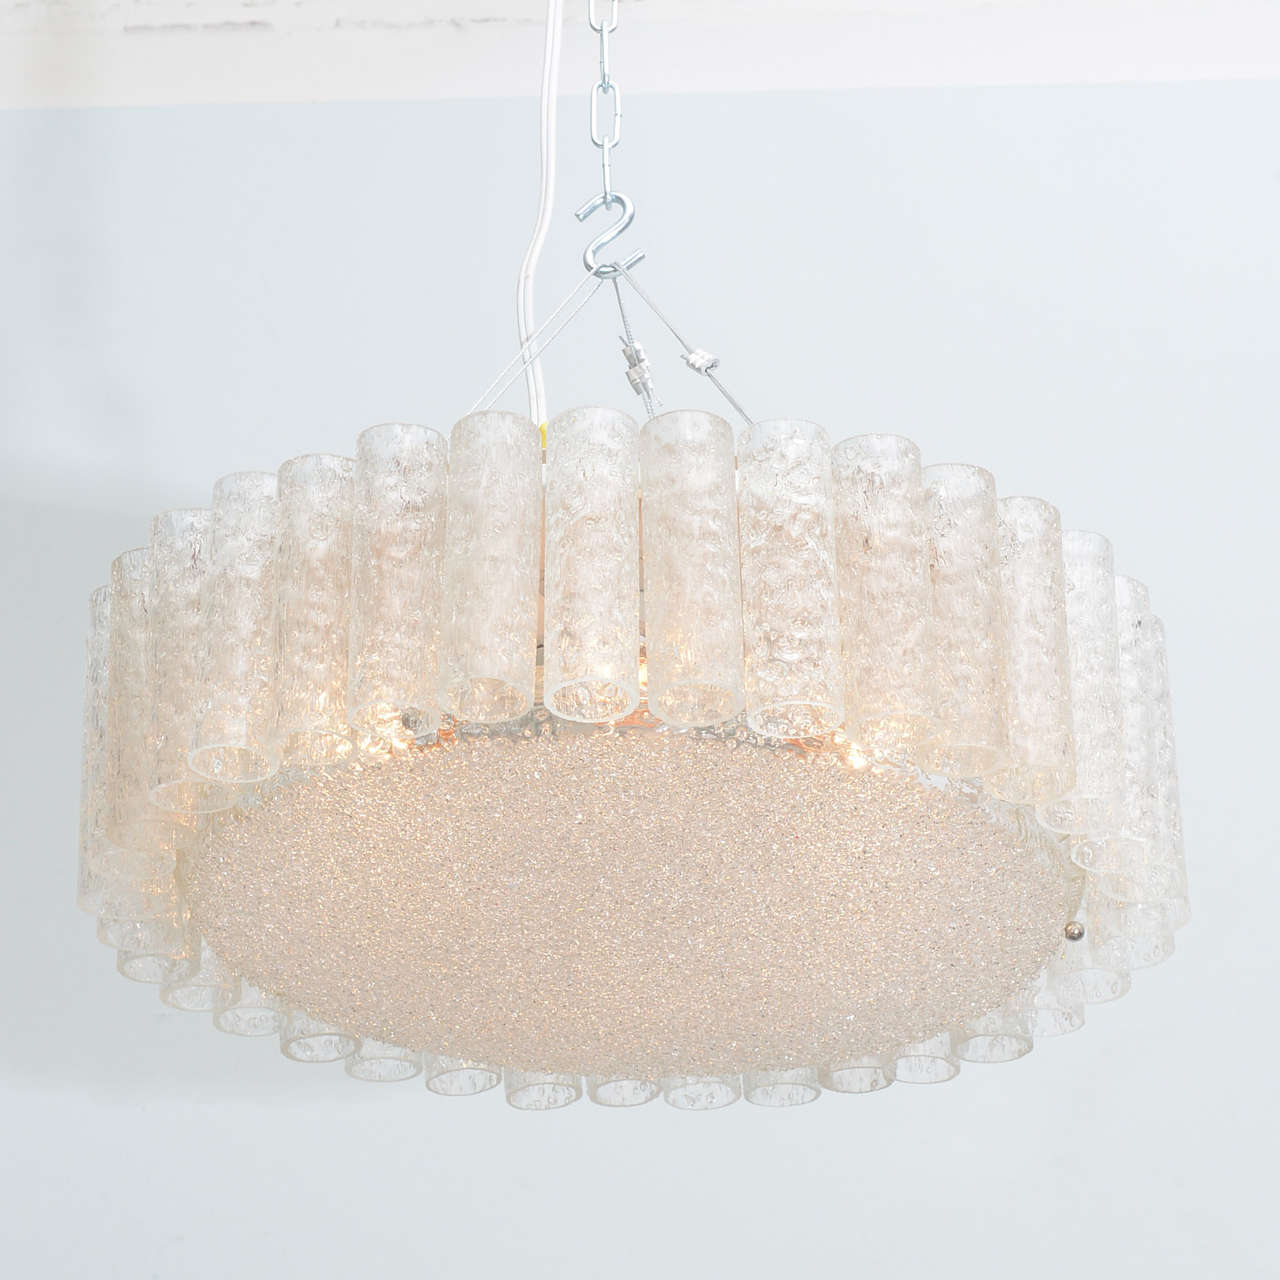 Handblown glass tubes encircling a central disc, can be flush mount or suspended.